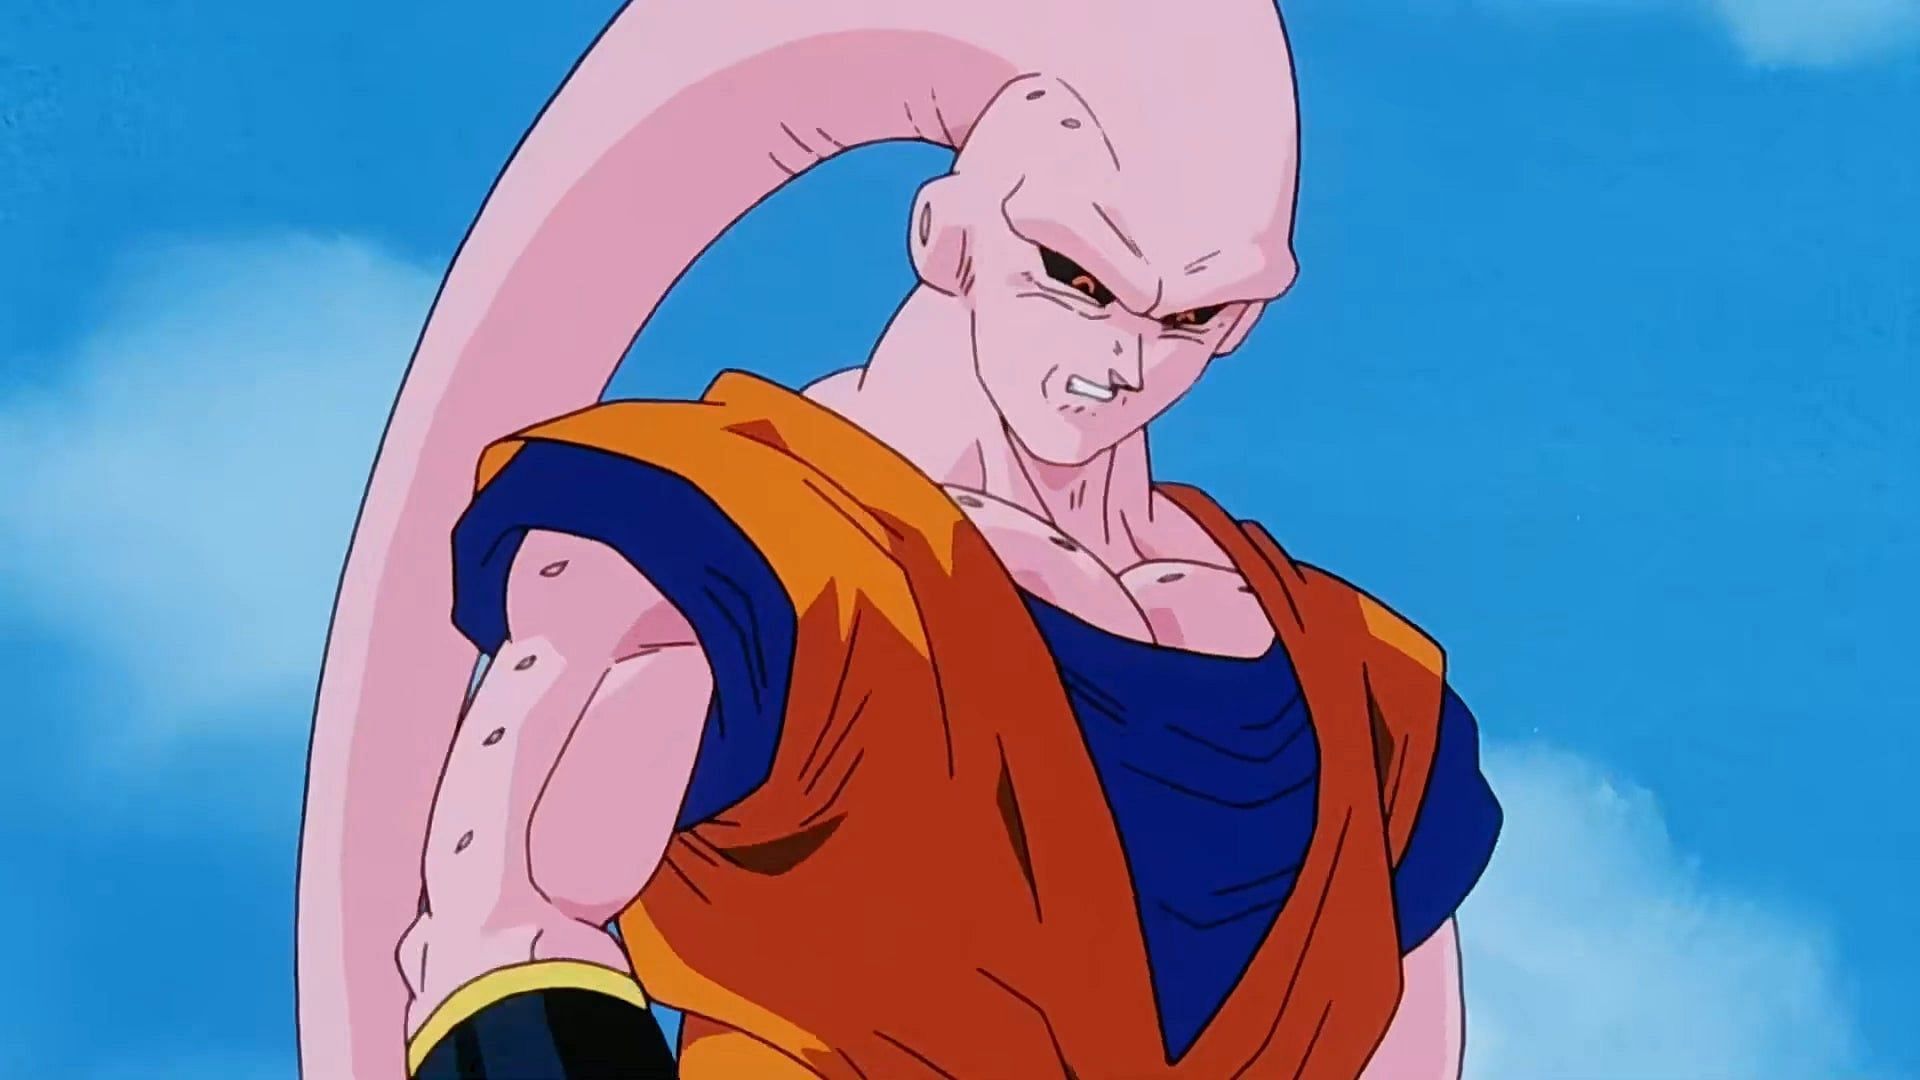 tactiek medley stem Who is the strongest Buu in Dragon Ball Z? Ranked from strongest to weakest